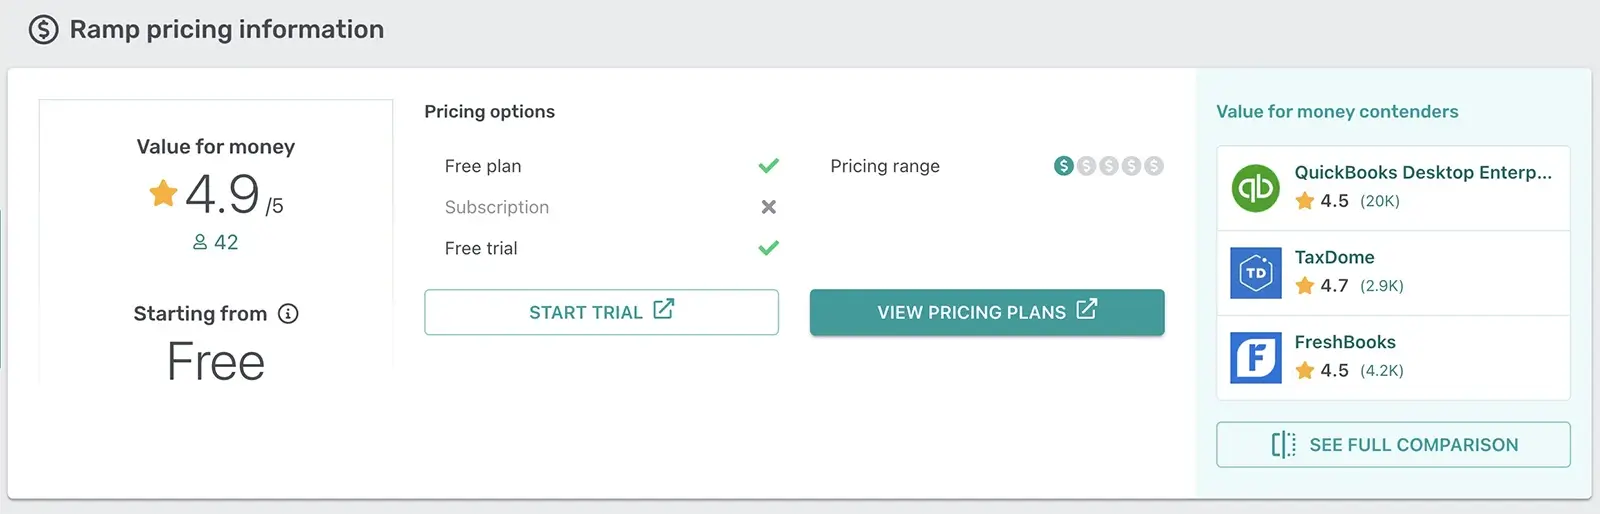 Pricing section